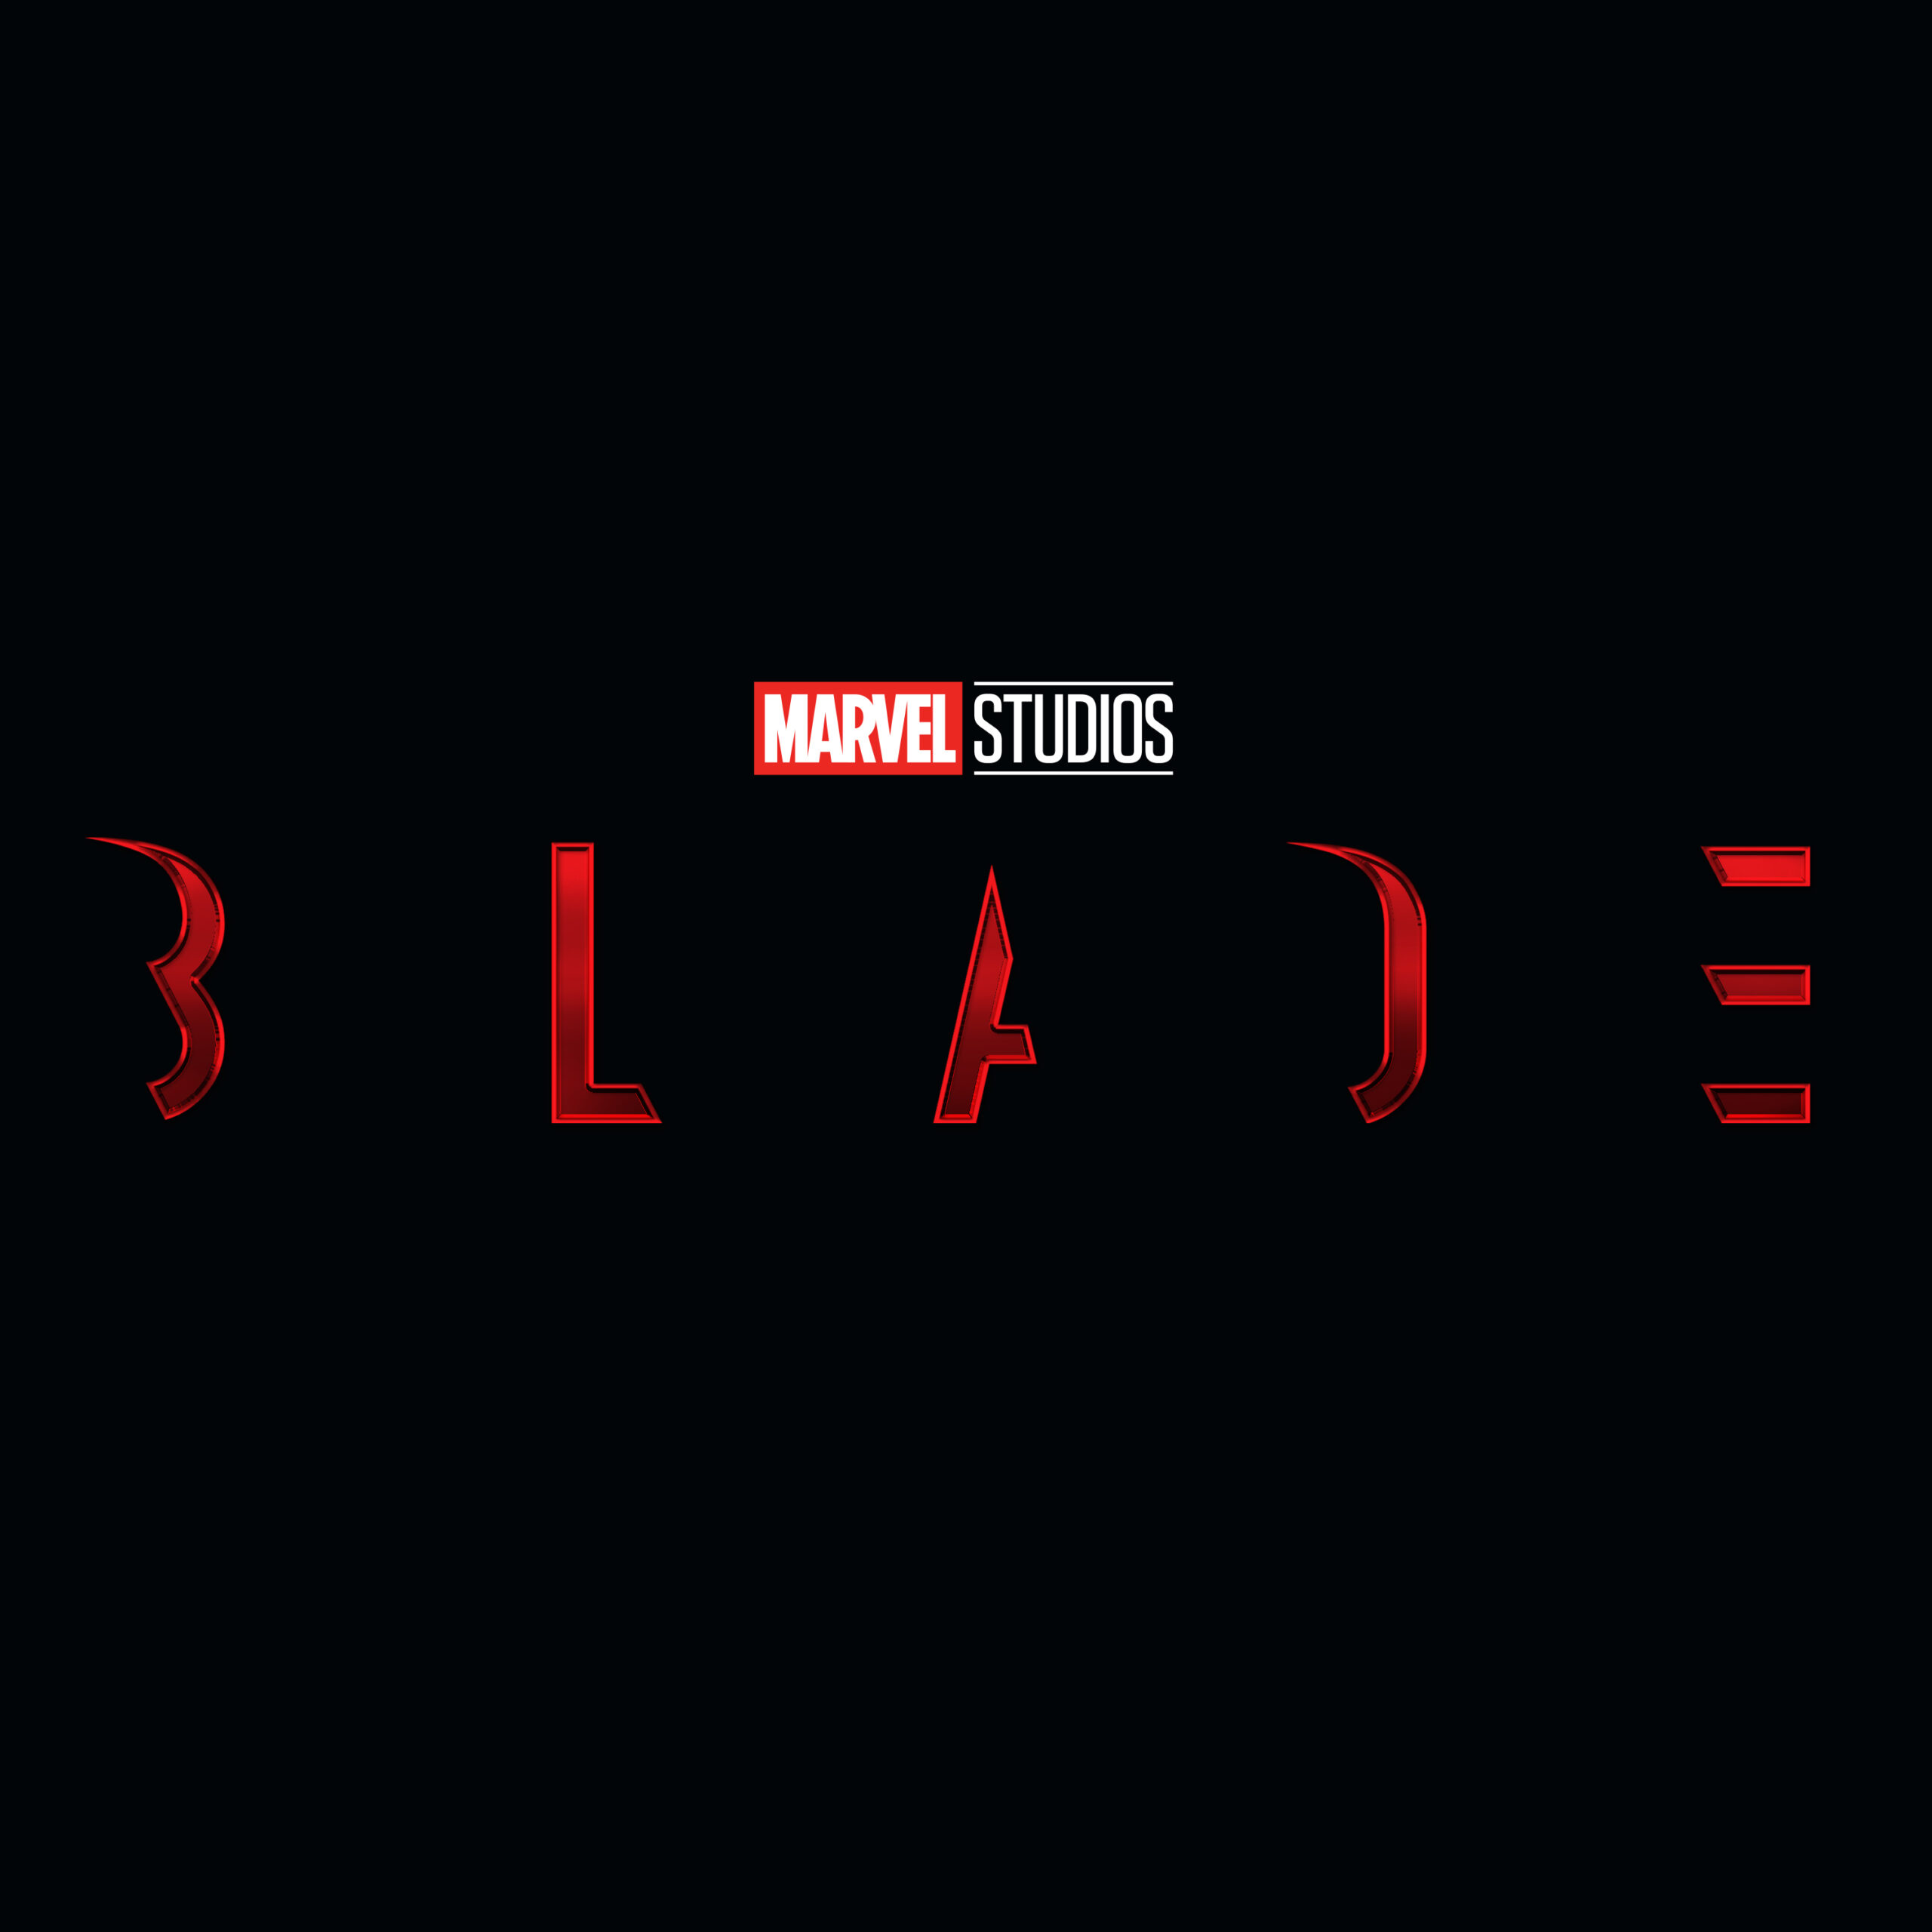 Blade loses director Bassam Tariq reports Deadline. Plus rumors around delays and potential script issues with the upcoming MCU movie.